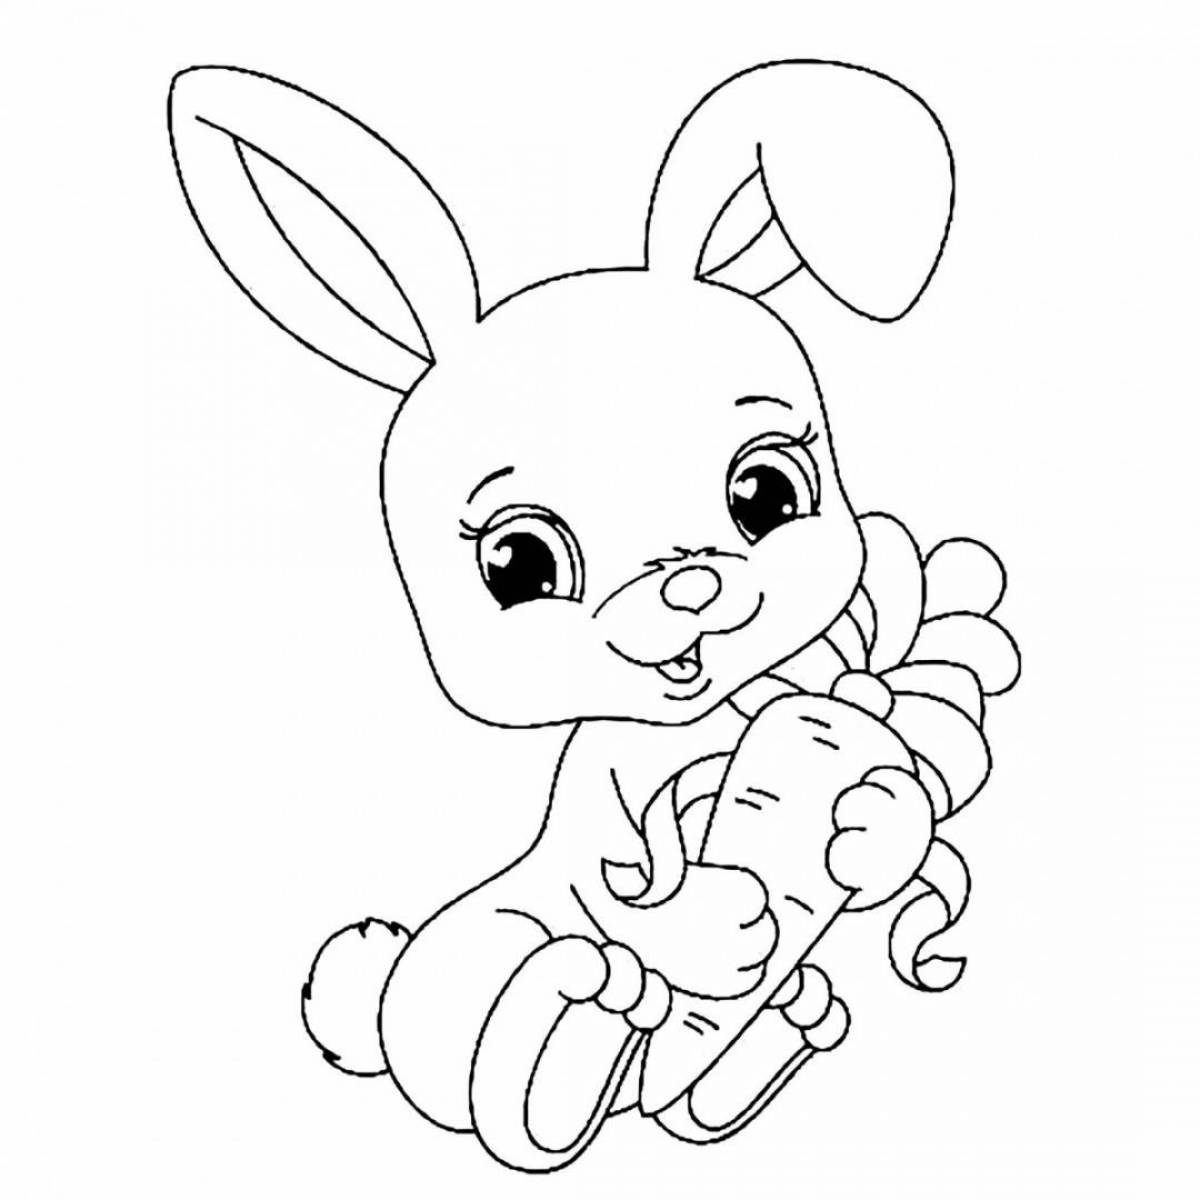 Entertaining coloring hare for children 3-4 years old